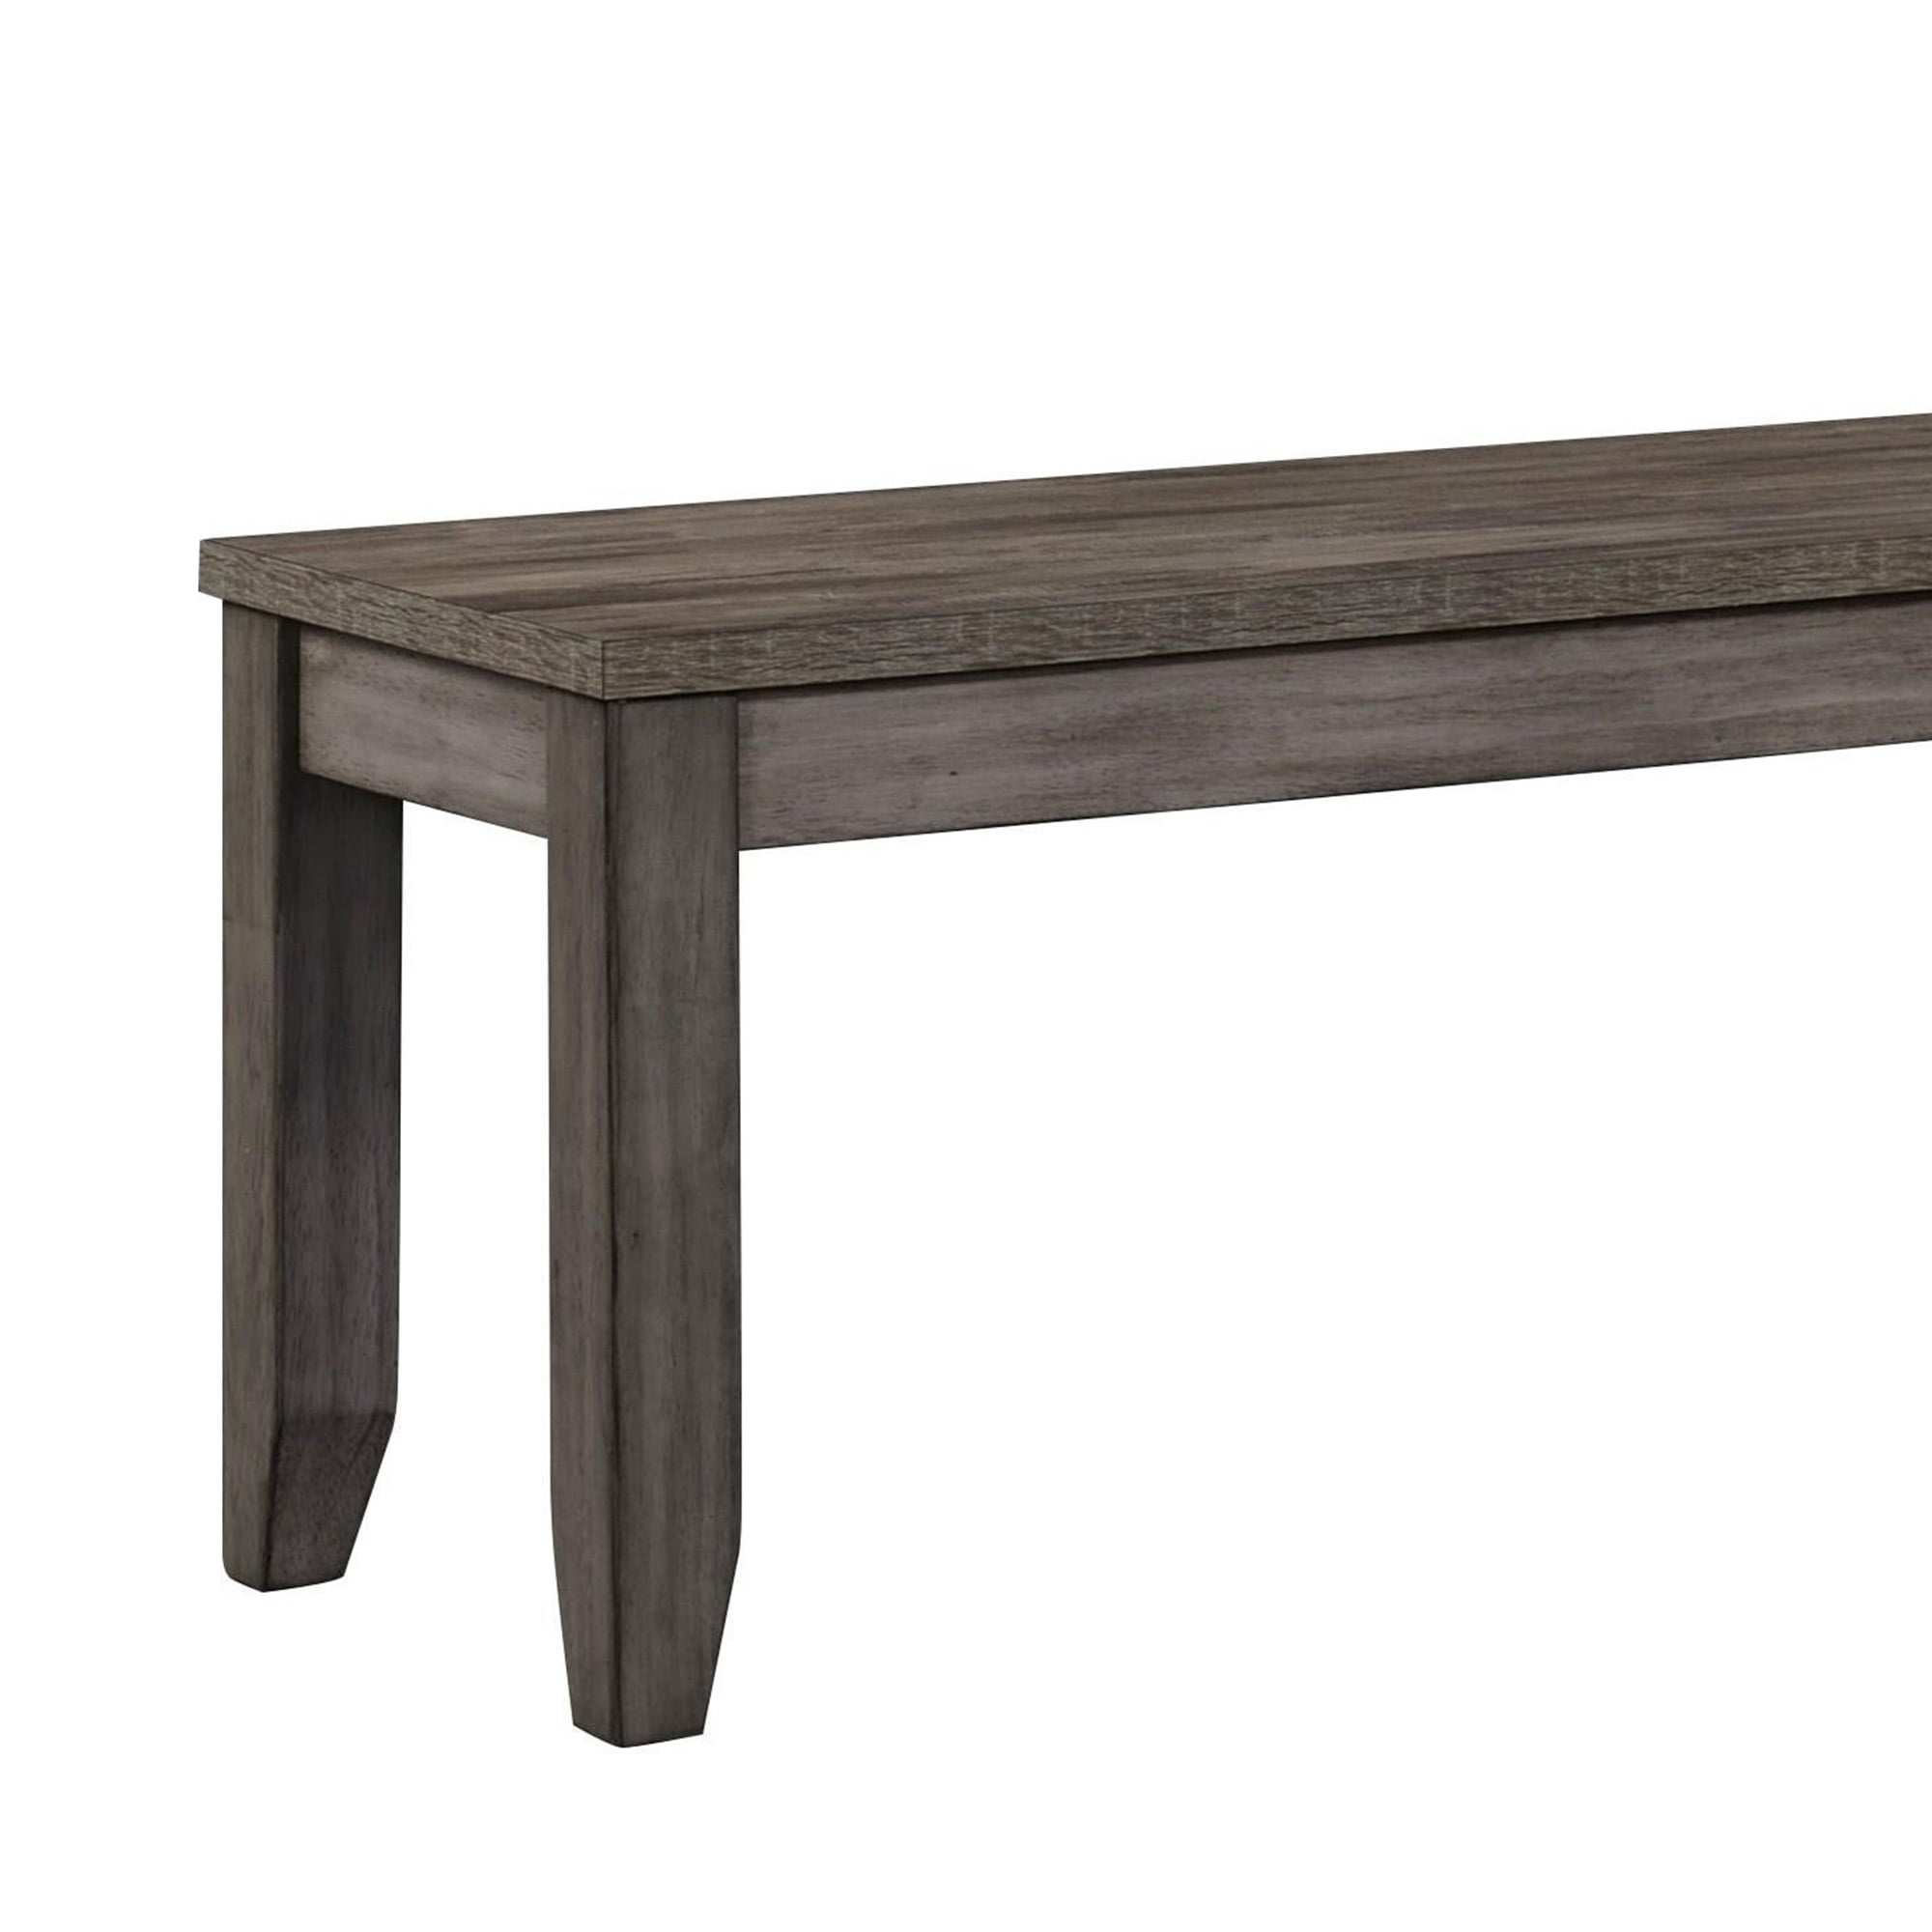 Benjara Wooden Frame Bench with Chamfered Legs and Grain Details Gray